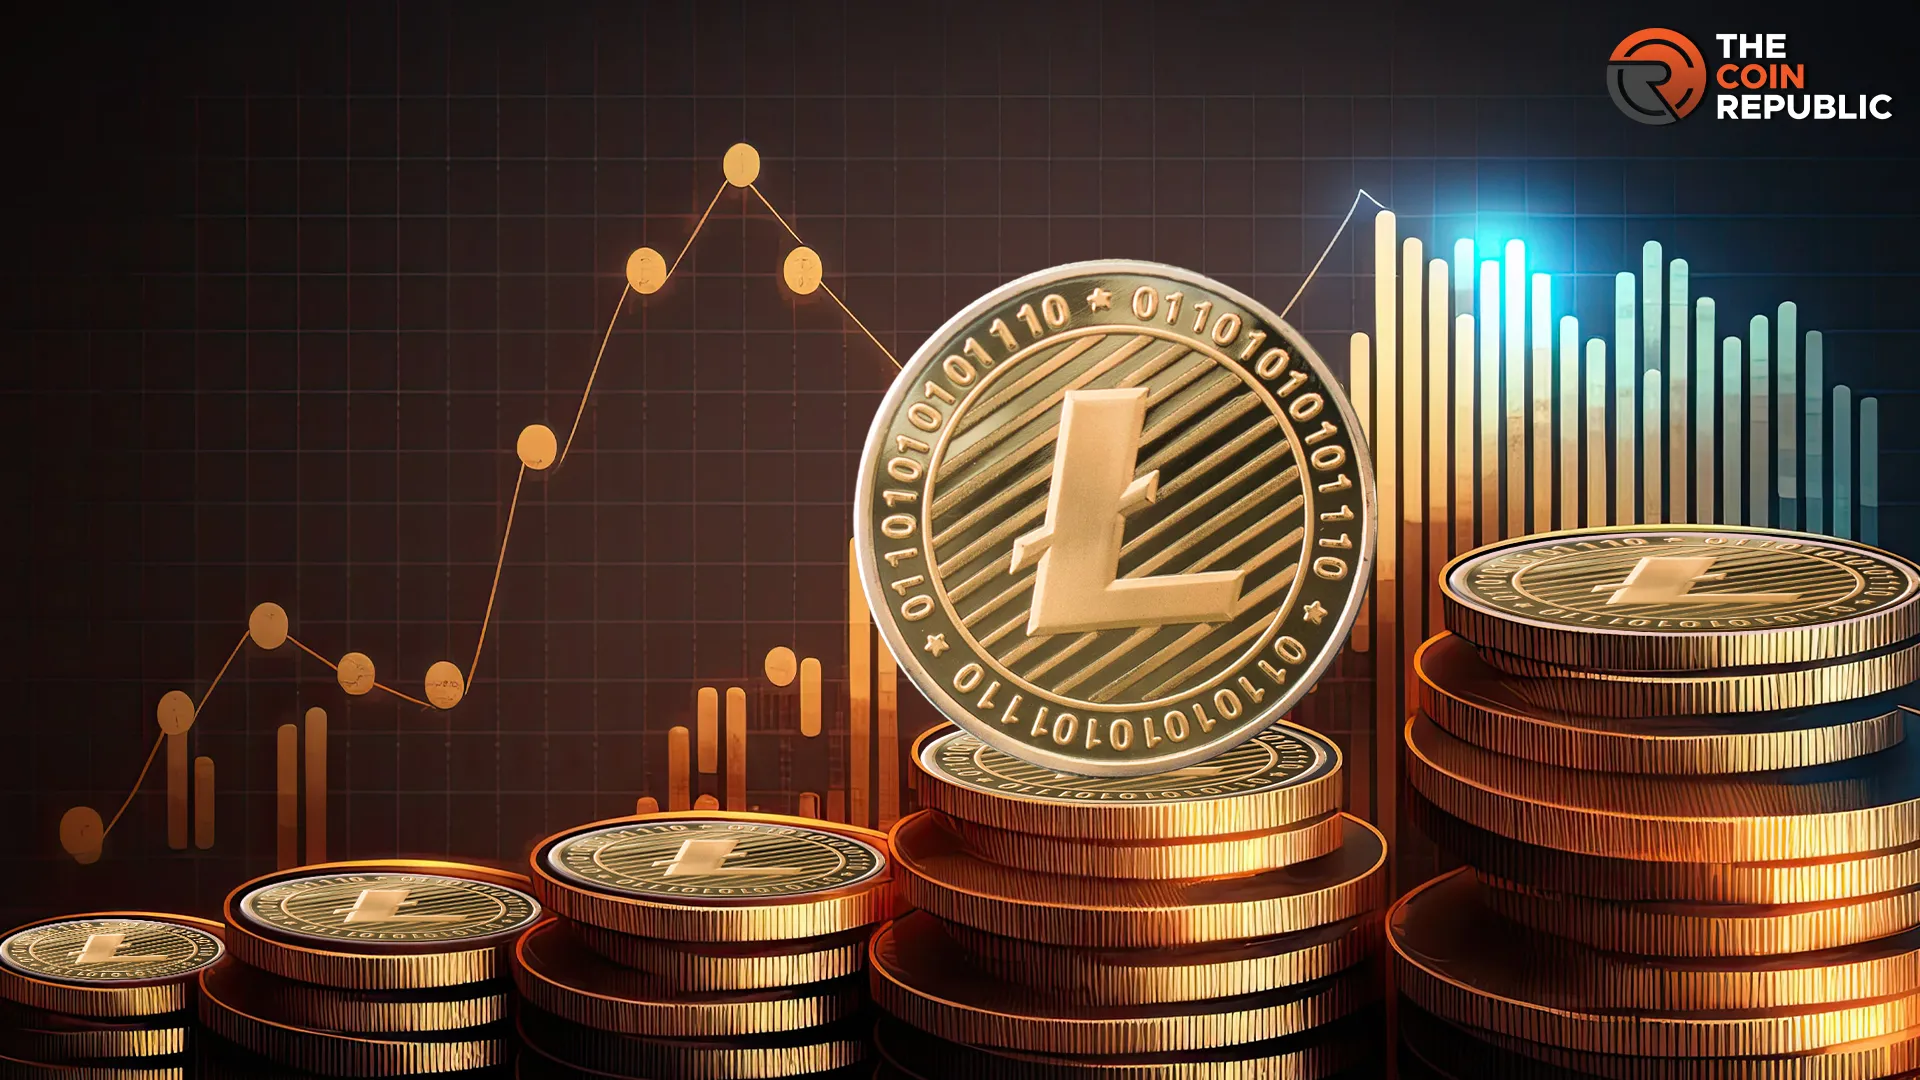 Litecoin (LTC) Recouped 10% This Week, Selling Pressure Reduced?